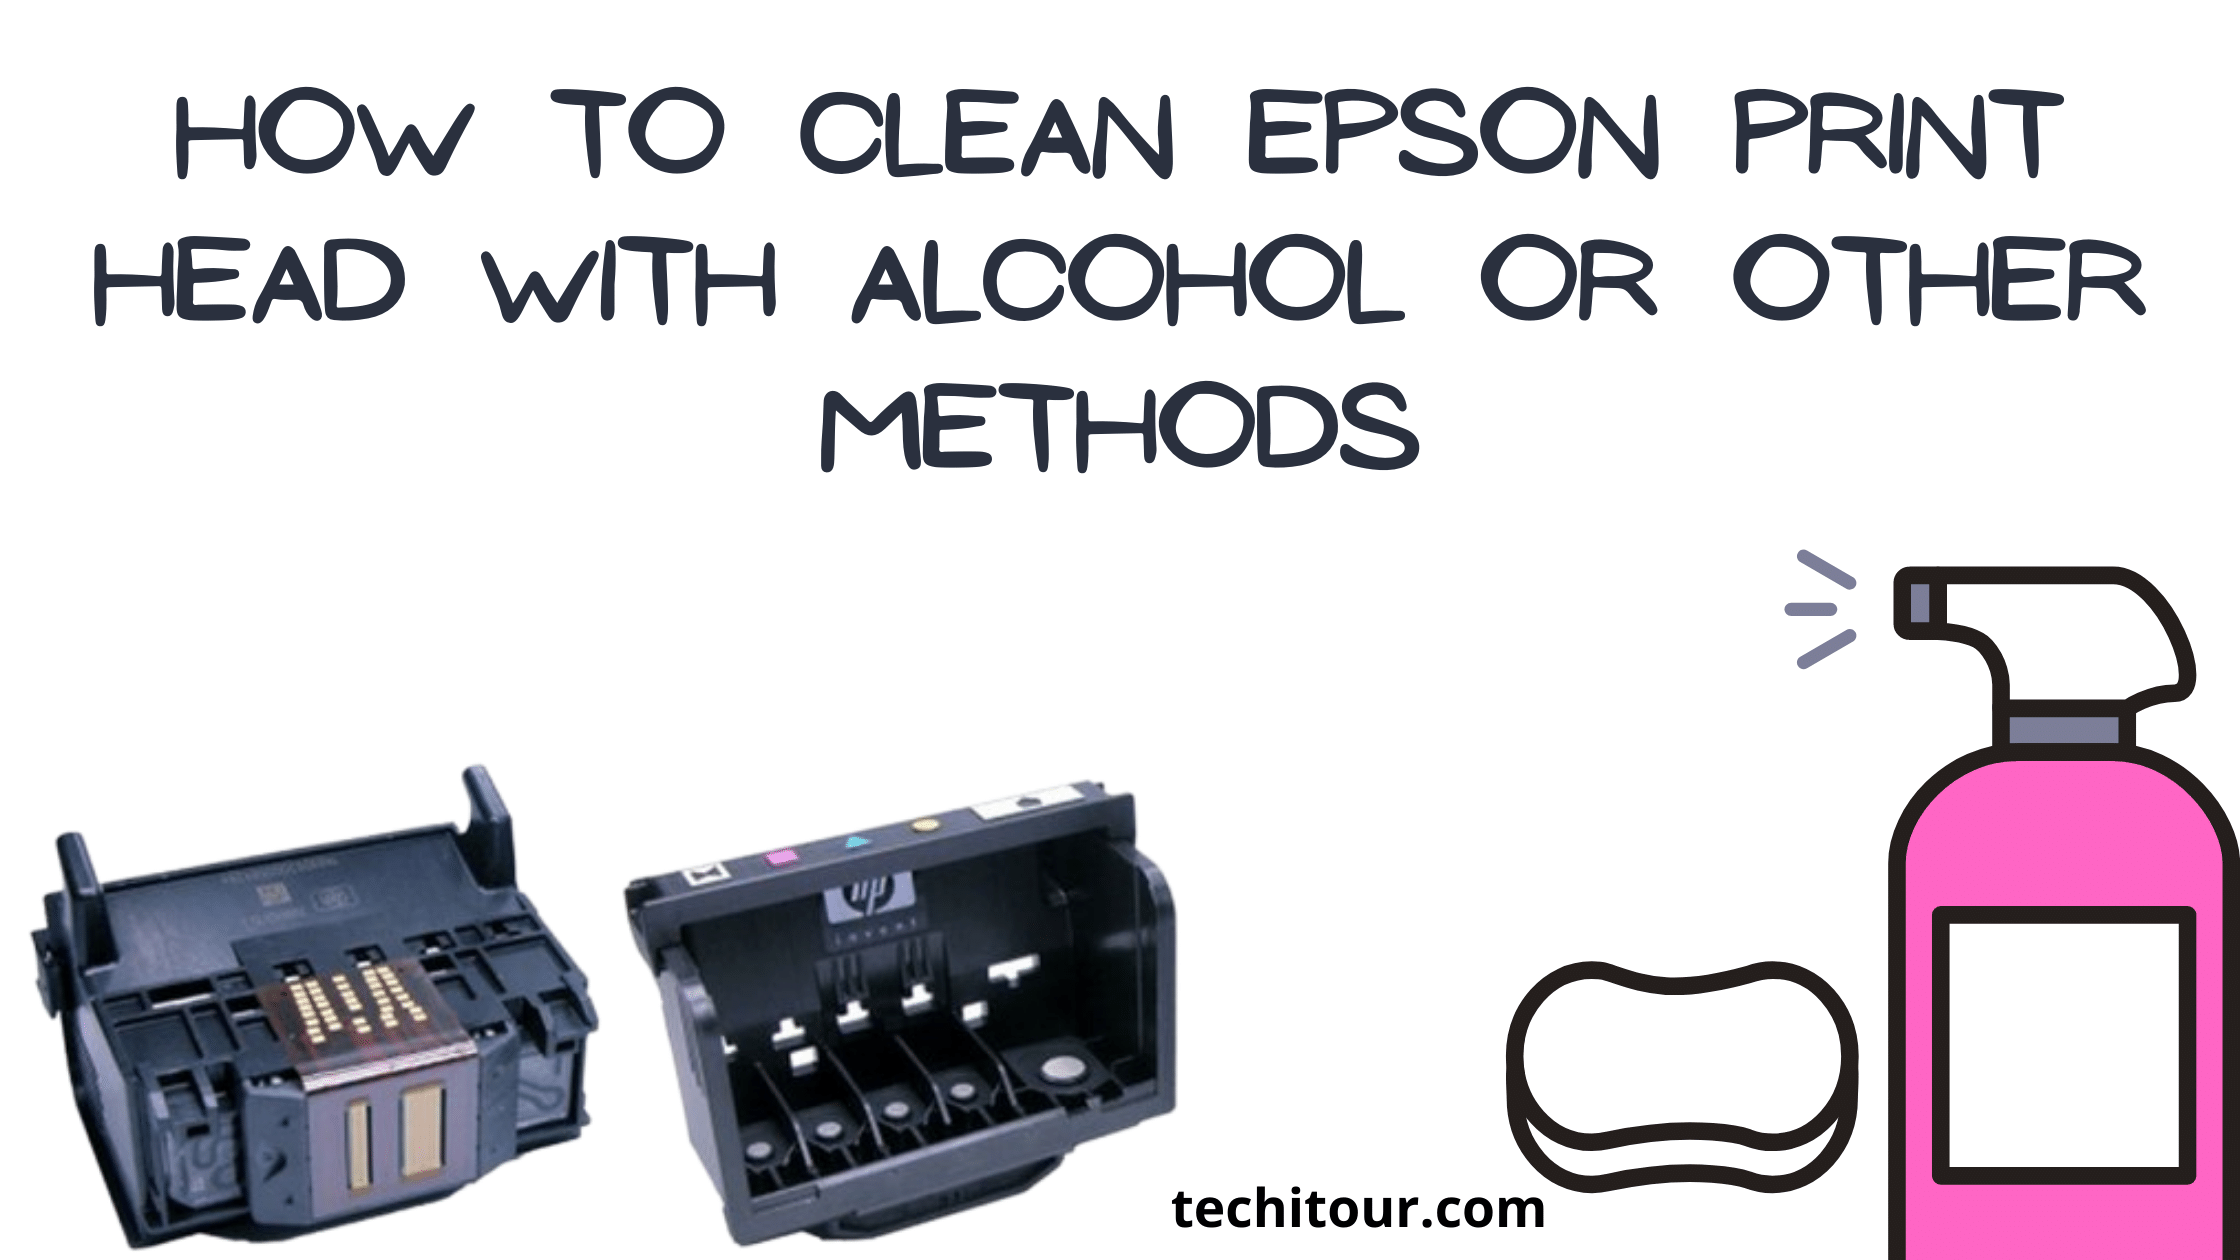 How to Clean Epson Print Head With Alcohol or Other Methods